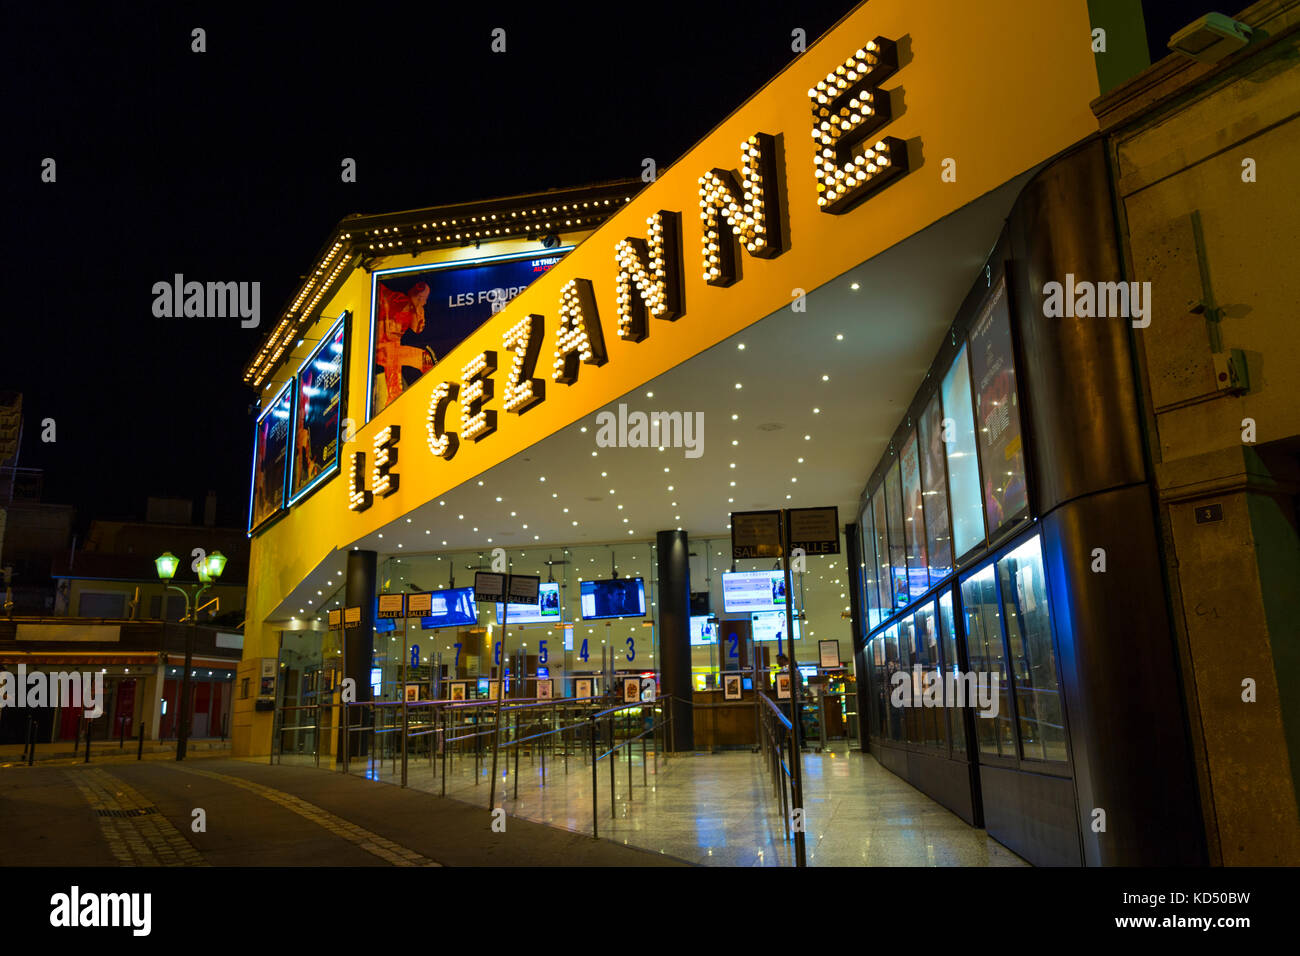 Le Cezanne cinema entrance at night in Aix en Provence, France Stock Photo